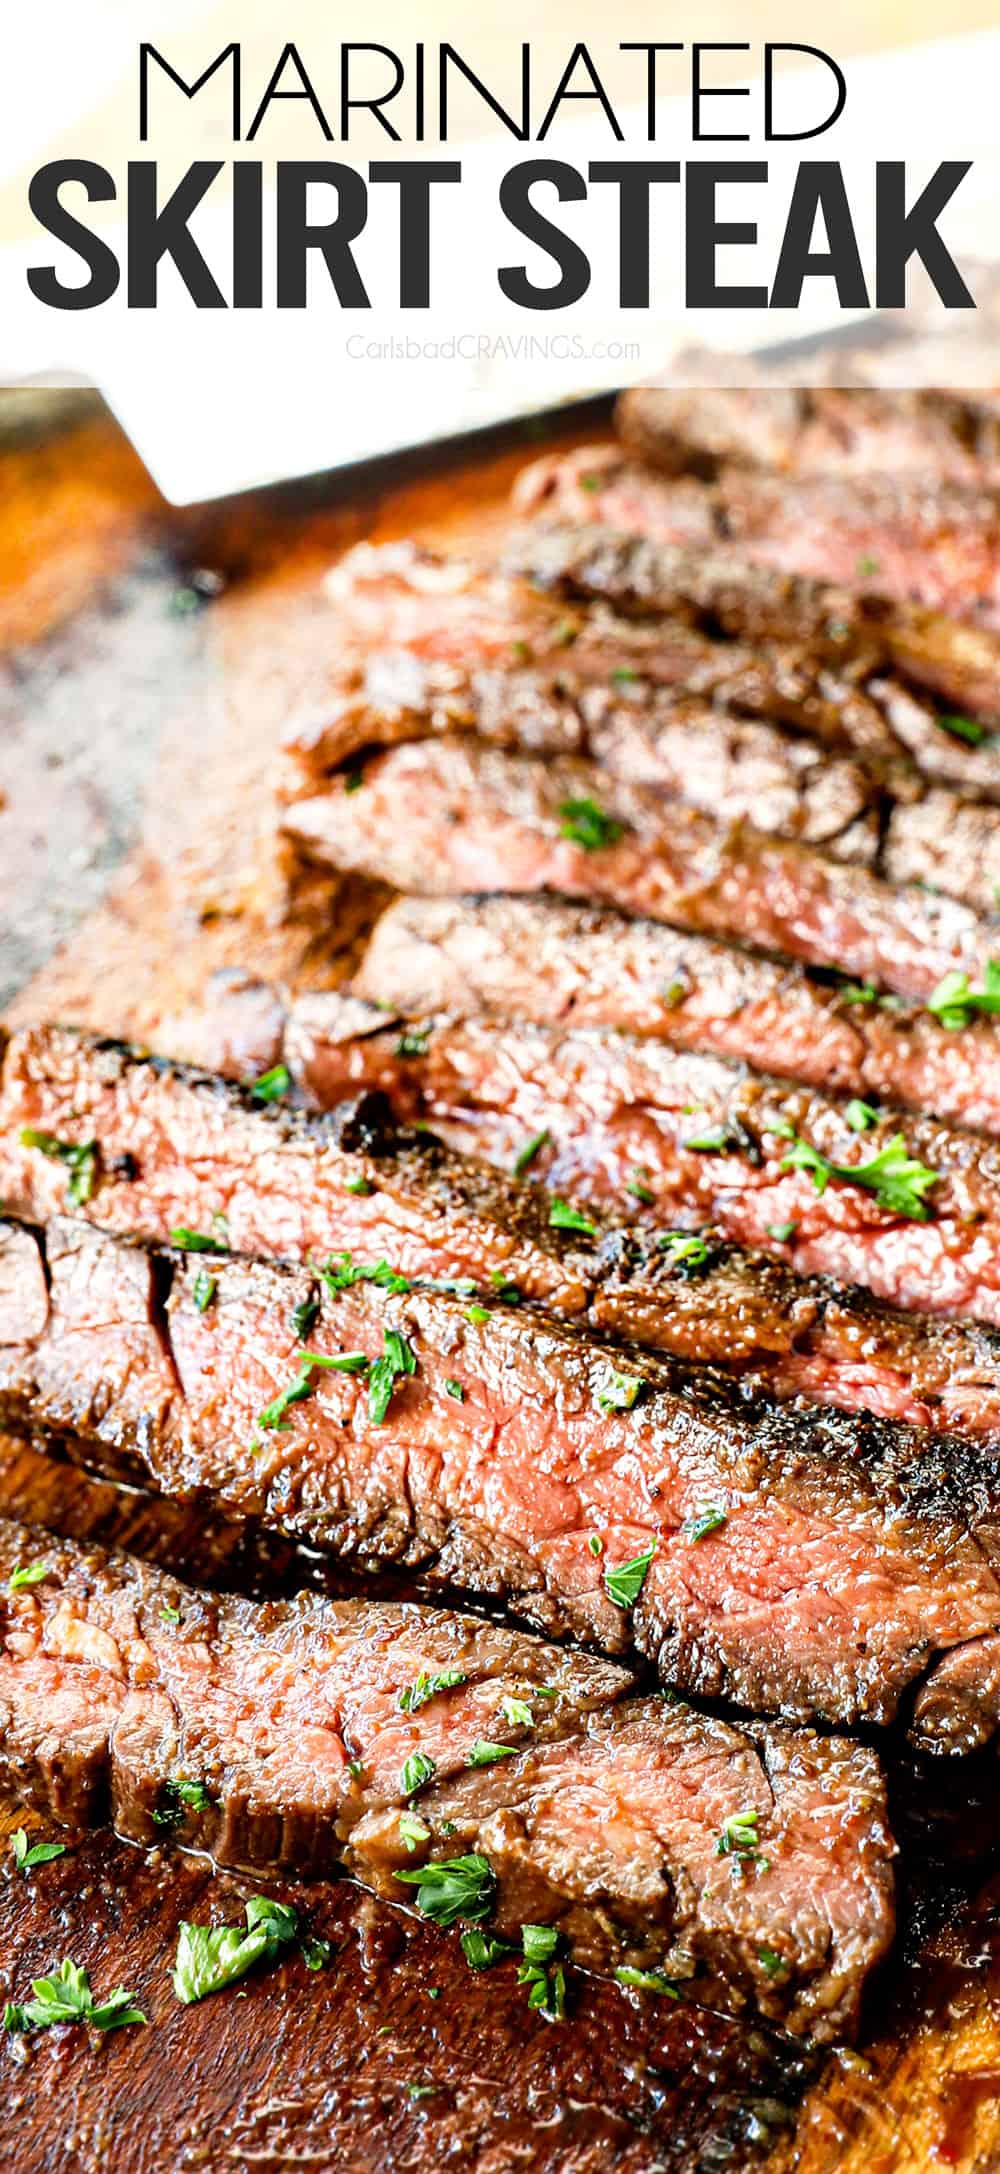 how to cook skirt steak by marinating, cooking at high heat then slicing against the grain